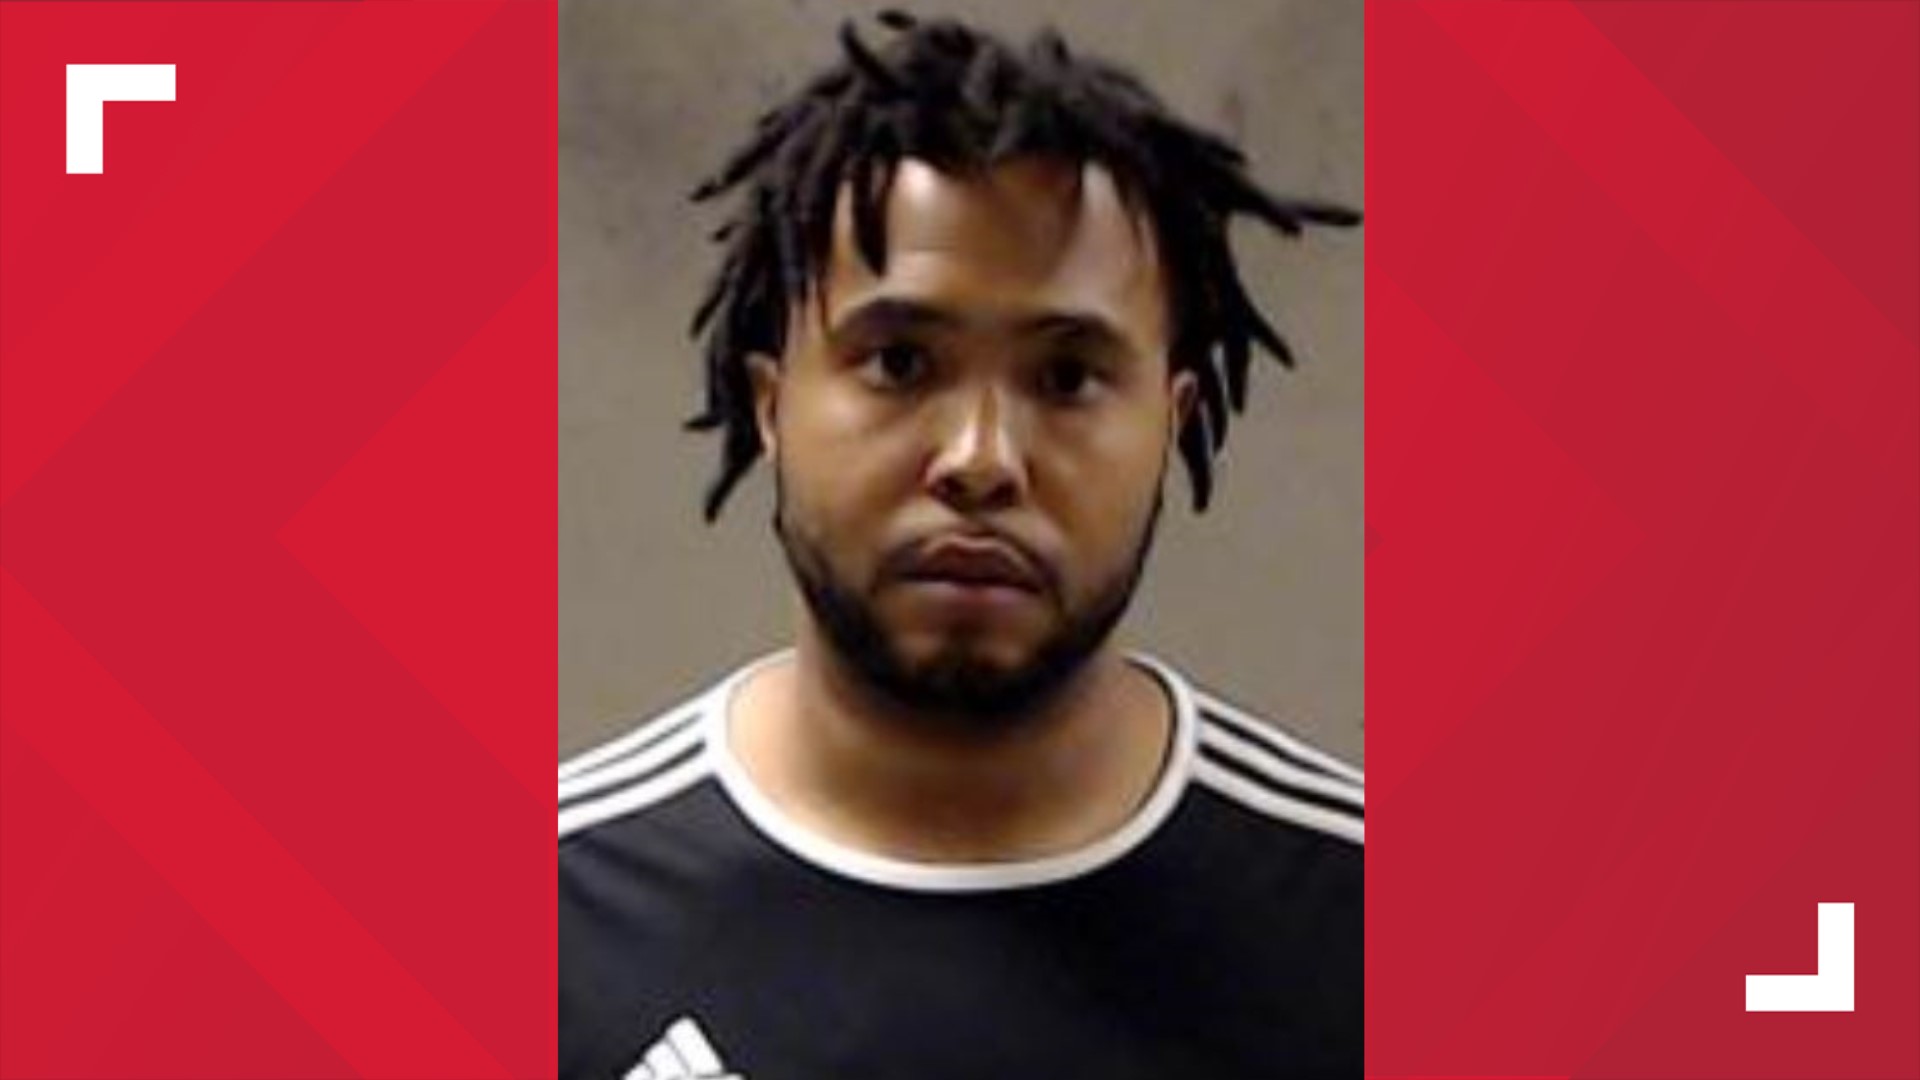 The $100,000 bond for Darius Morris in the case, where records indicate he was accused of causing the death of the mother of his child, was granted in late 2020.